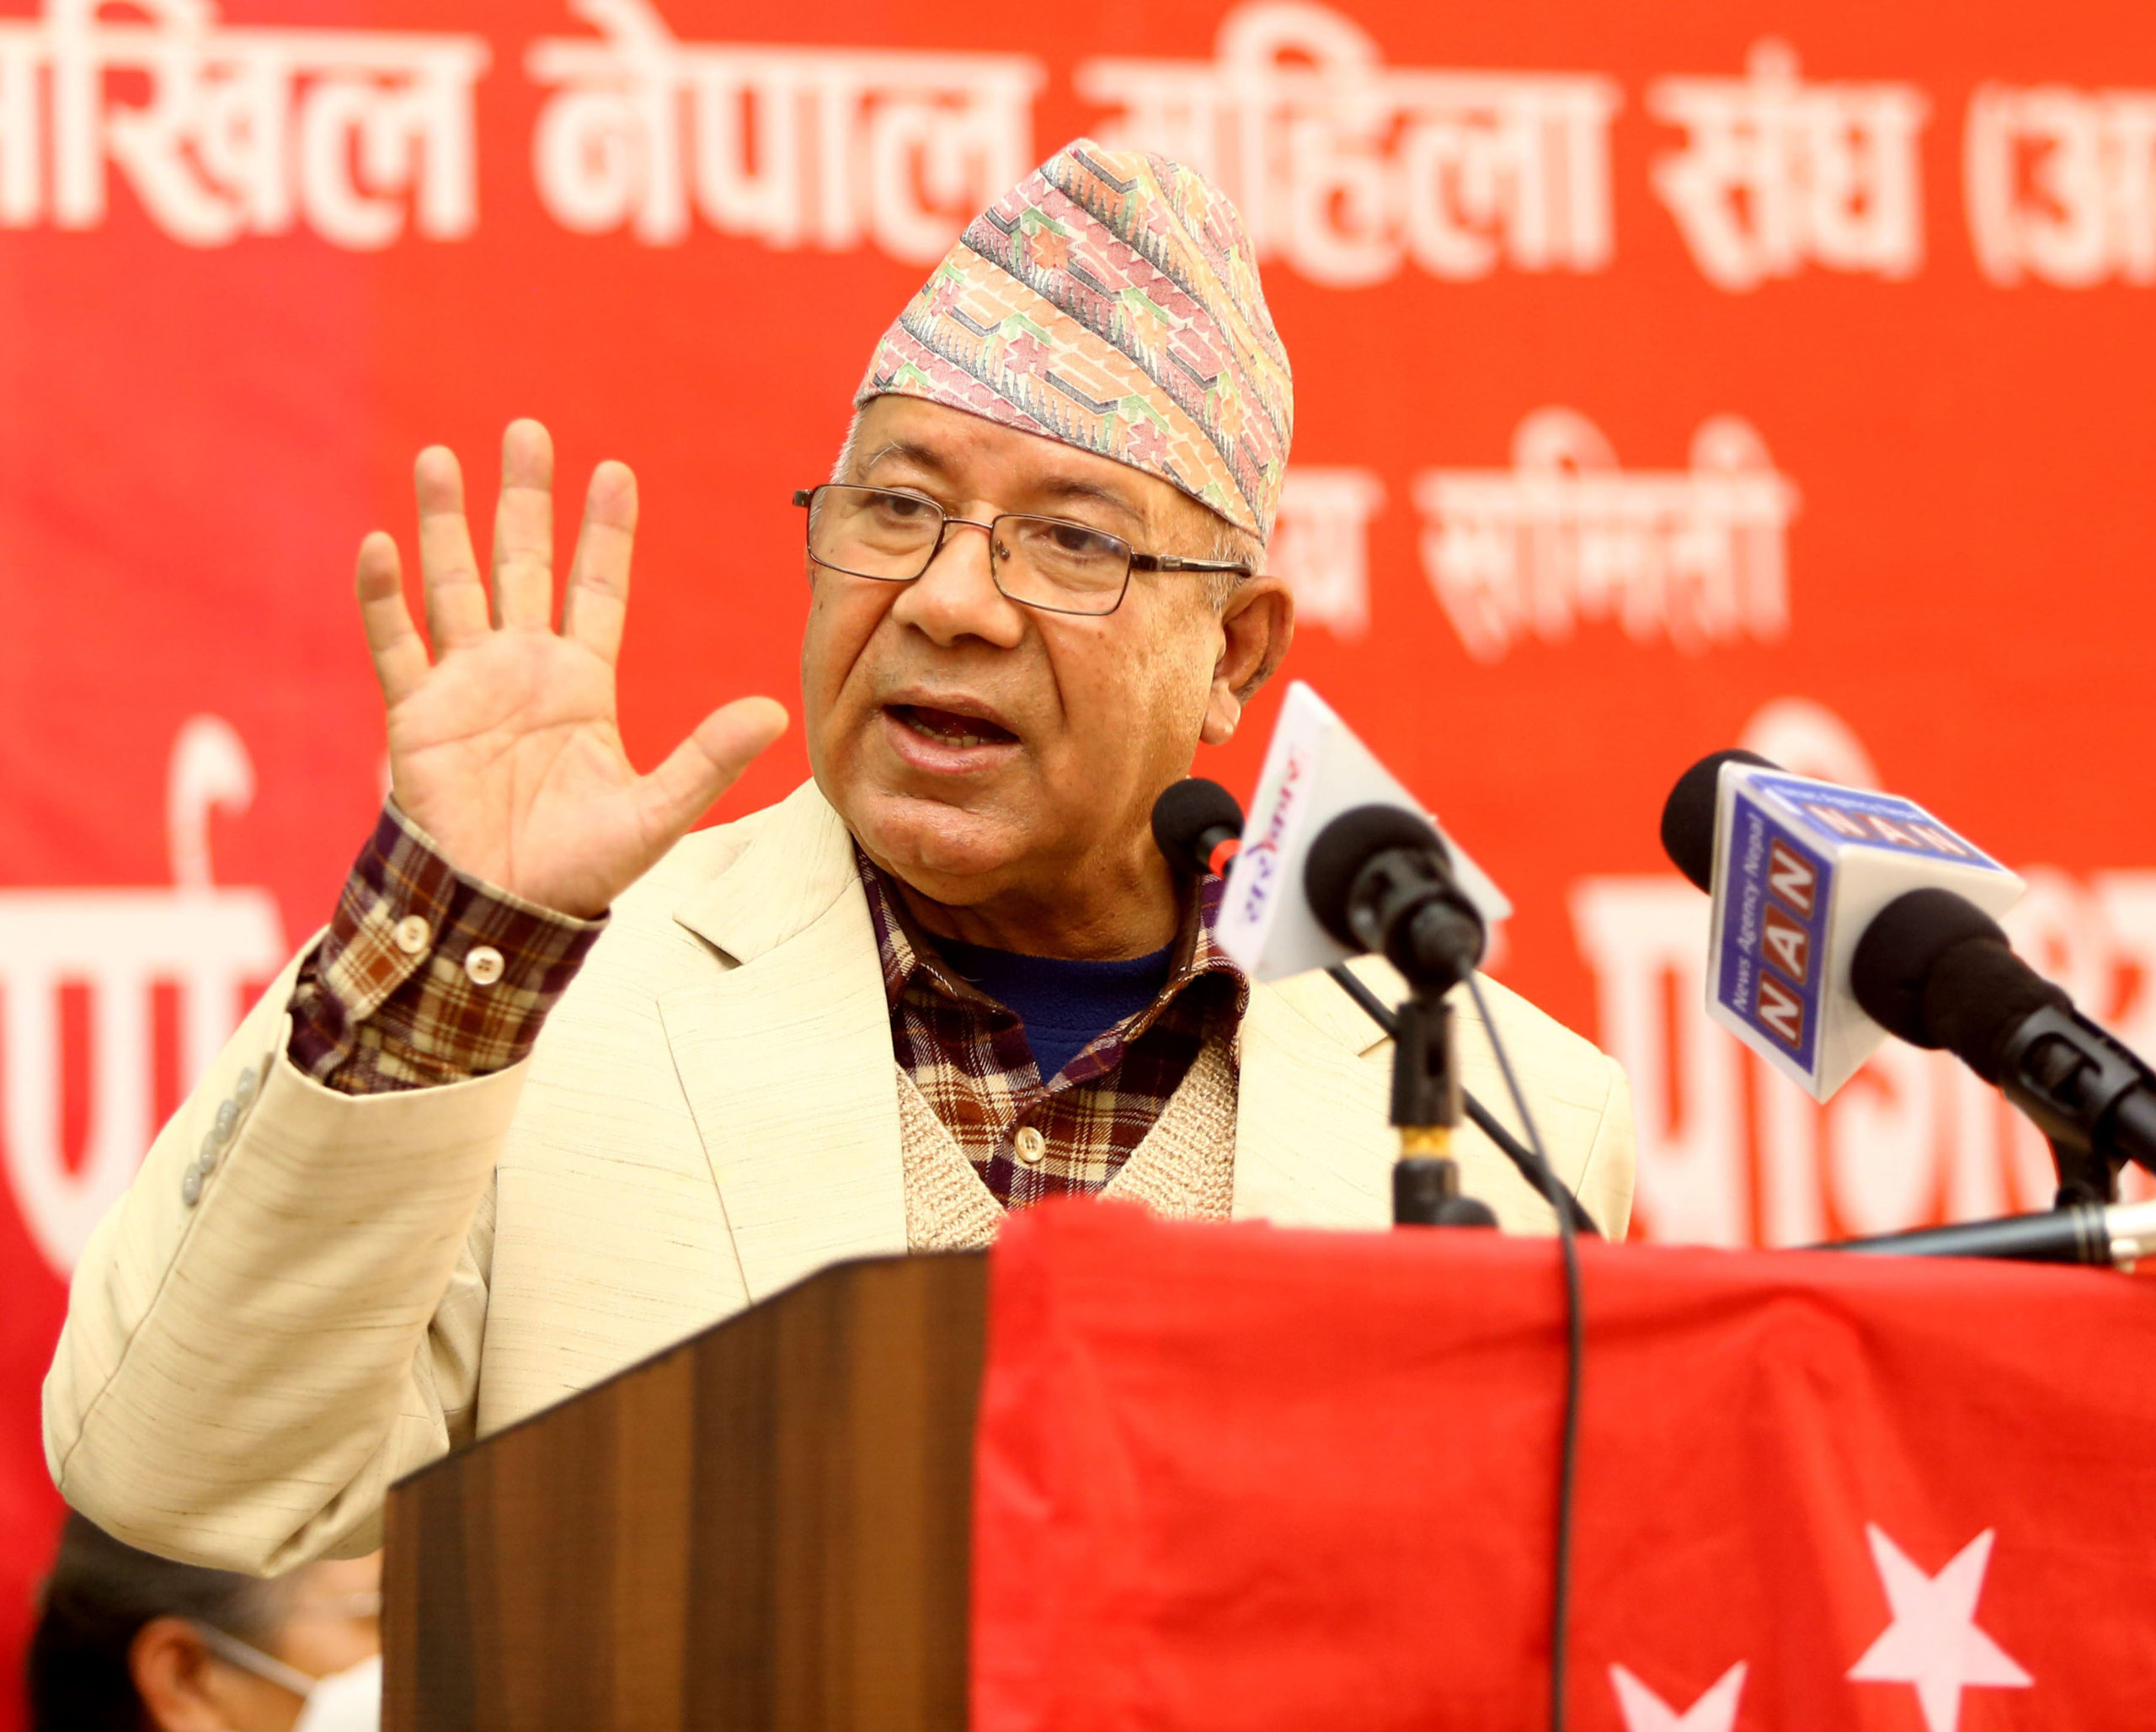 HoR dissolution adds challenges on political achievements: Leader Nepal